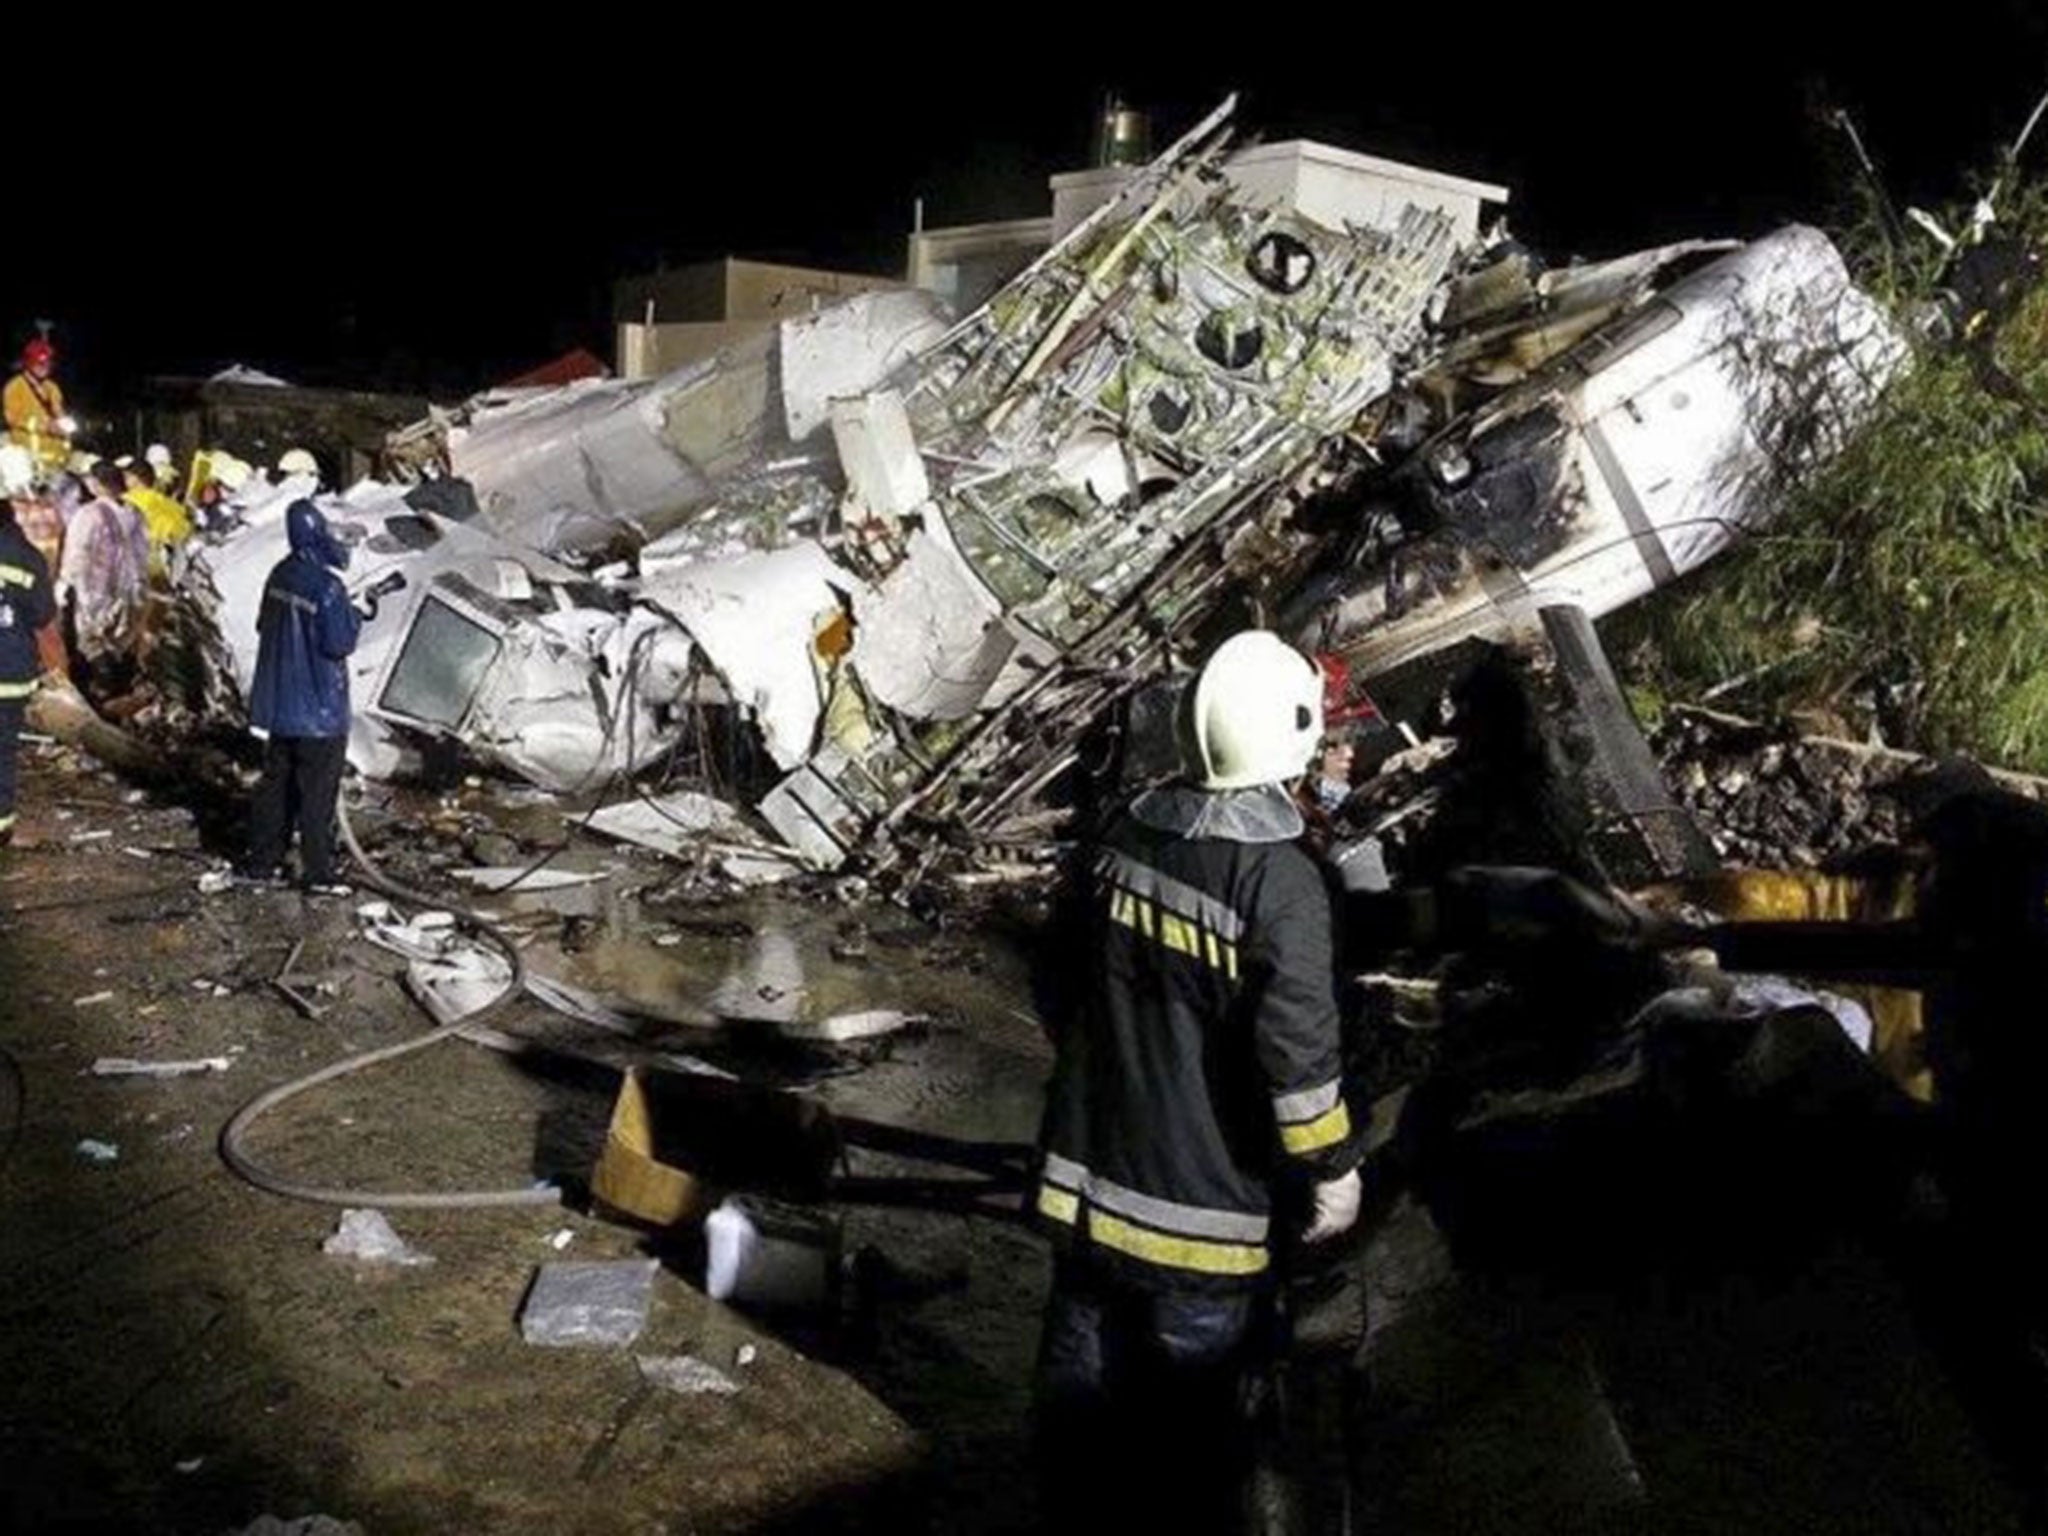 Rescue workers survey the wreckage of TransAsia Airways flight GE222 which crashed while attempting to land in stormy weather on the Taiwanese island of Penghu, late Wednesday, July 23, 2014. A transport minister said dozens of people were trapped and fea